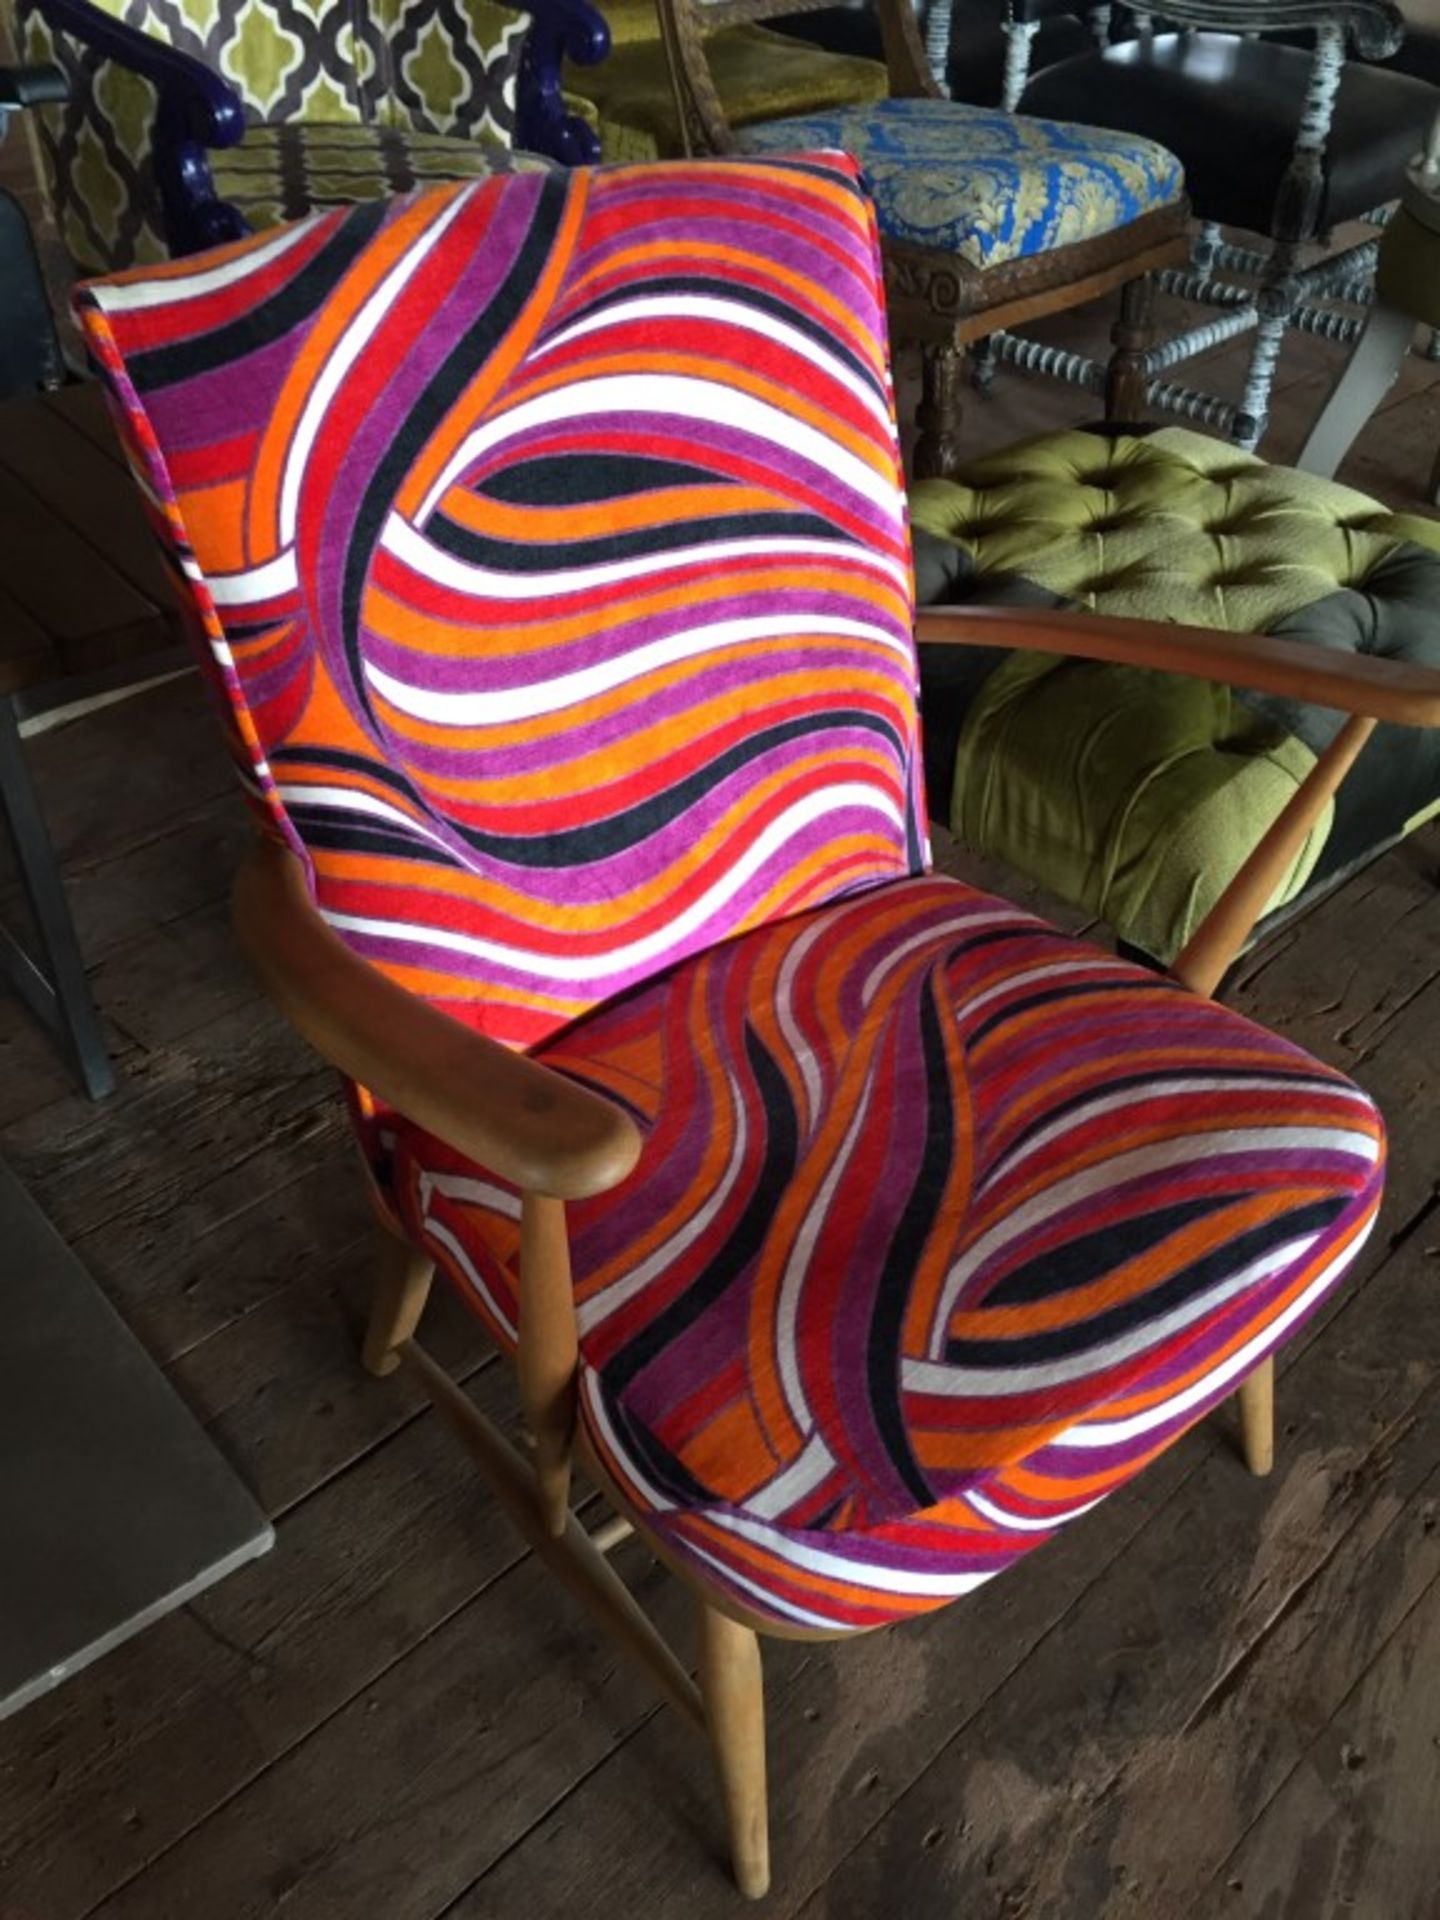 1 x Stunning Vintage G-Plan Chair - Expertly Reupholstered In Luxury Fabric By Professional - Image 2 of 4